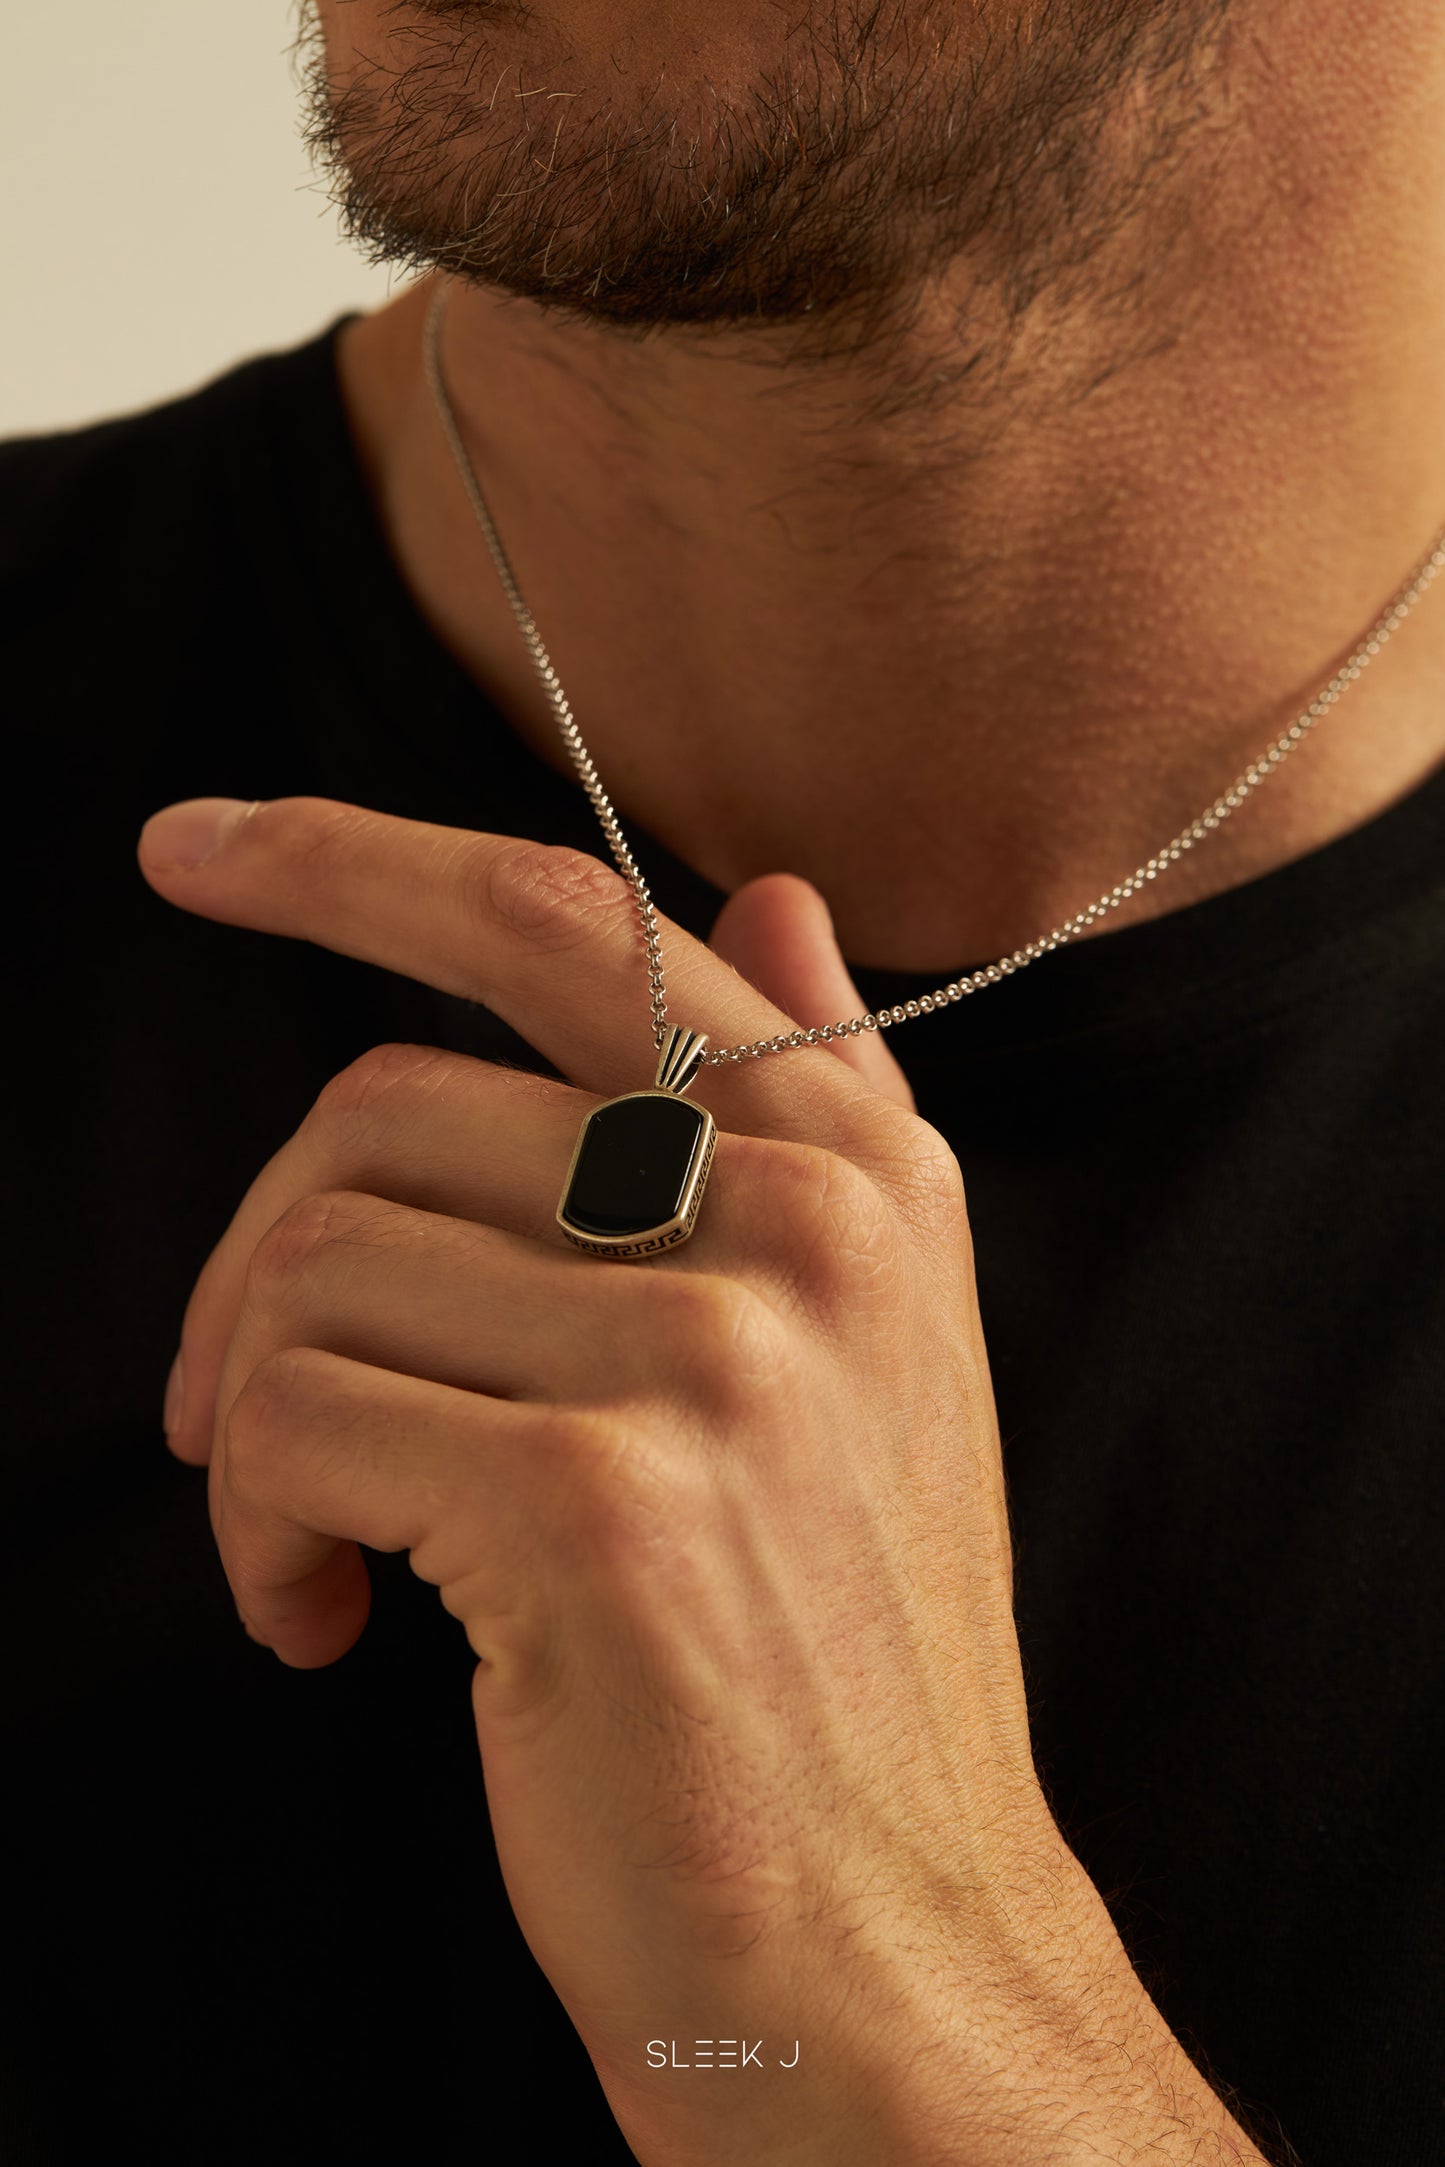 Premium Onyx Beverly Pendant: 925 Sterling Silver with High-Quality Rhodium-Plated Silver Circle Rolo Link Chain